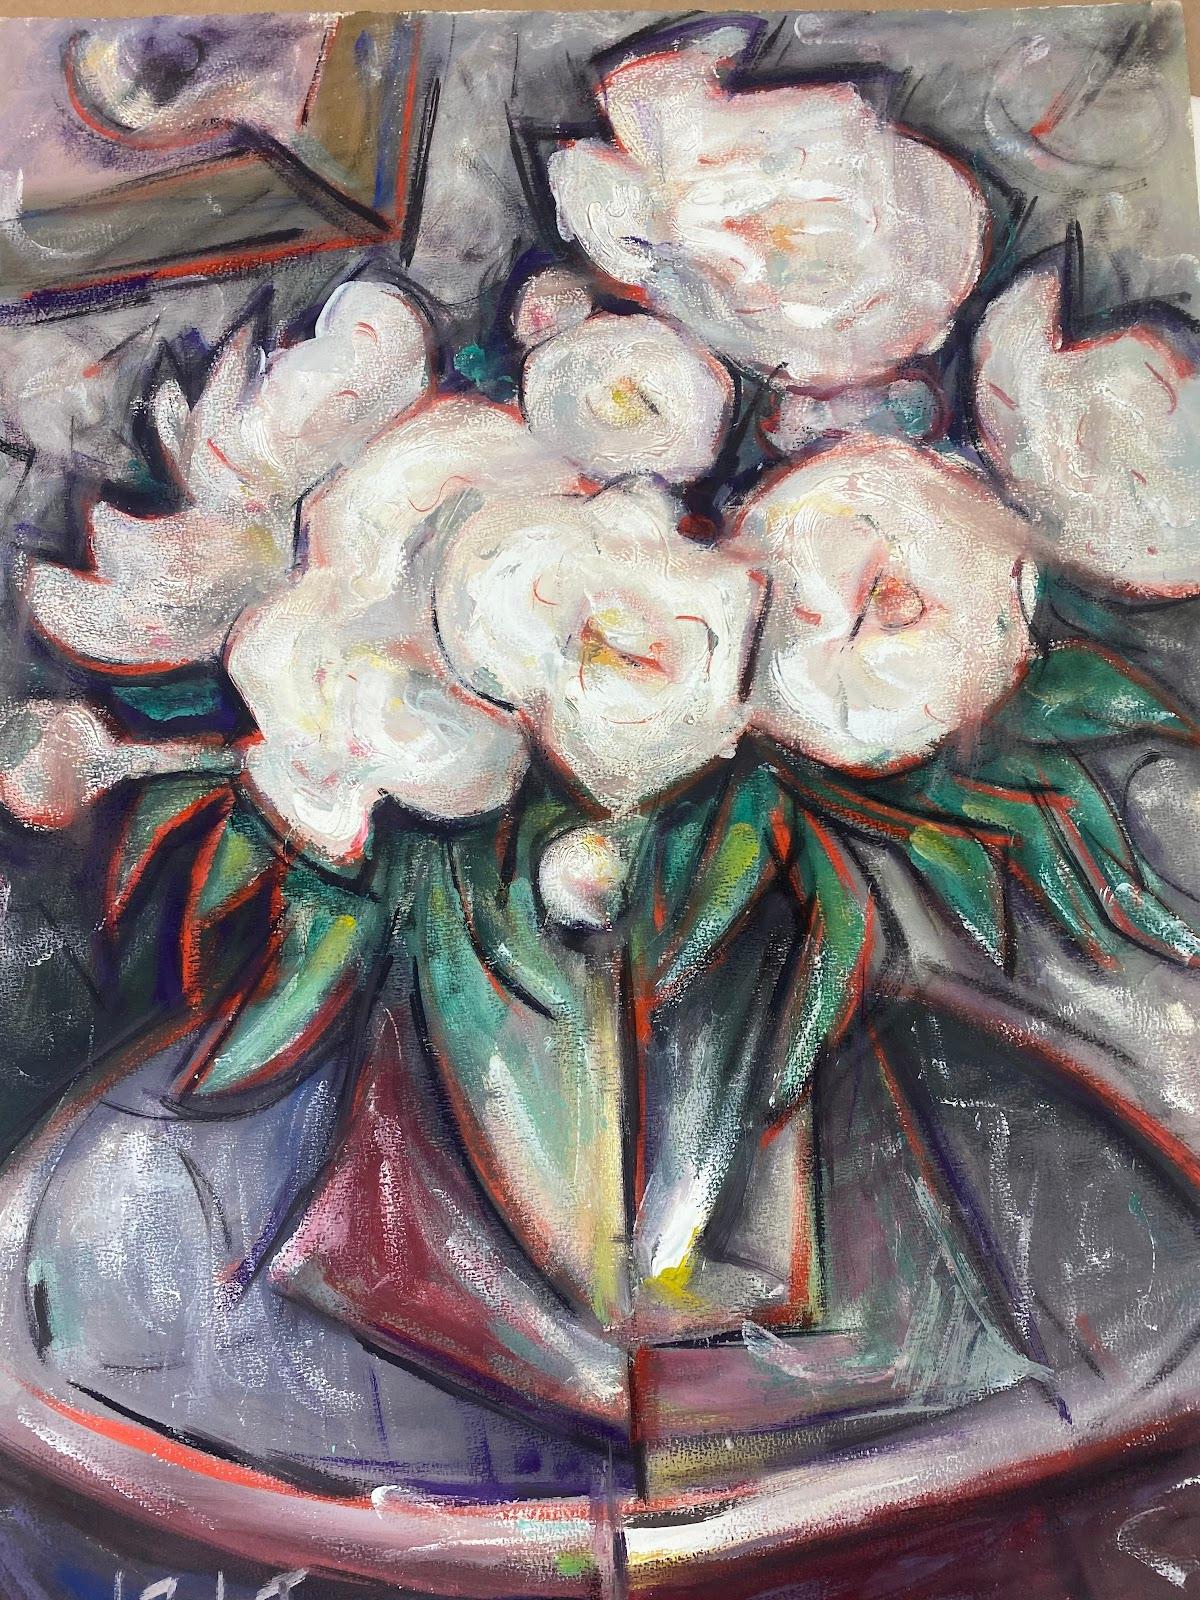 White Peonies
by Paul-Louis Bolot (French 1918-2003)
signed
original gouache painting on thick paper/ card
unframed
condition: very good and sound; the edges have a few curls and scuffs/ edge tears which should all cover once flattened or framed.